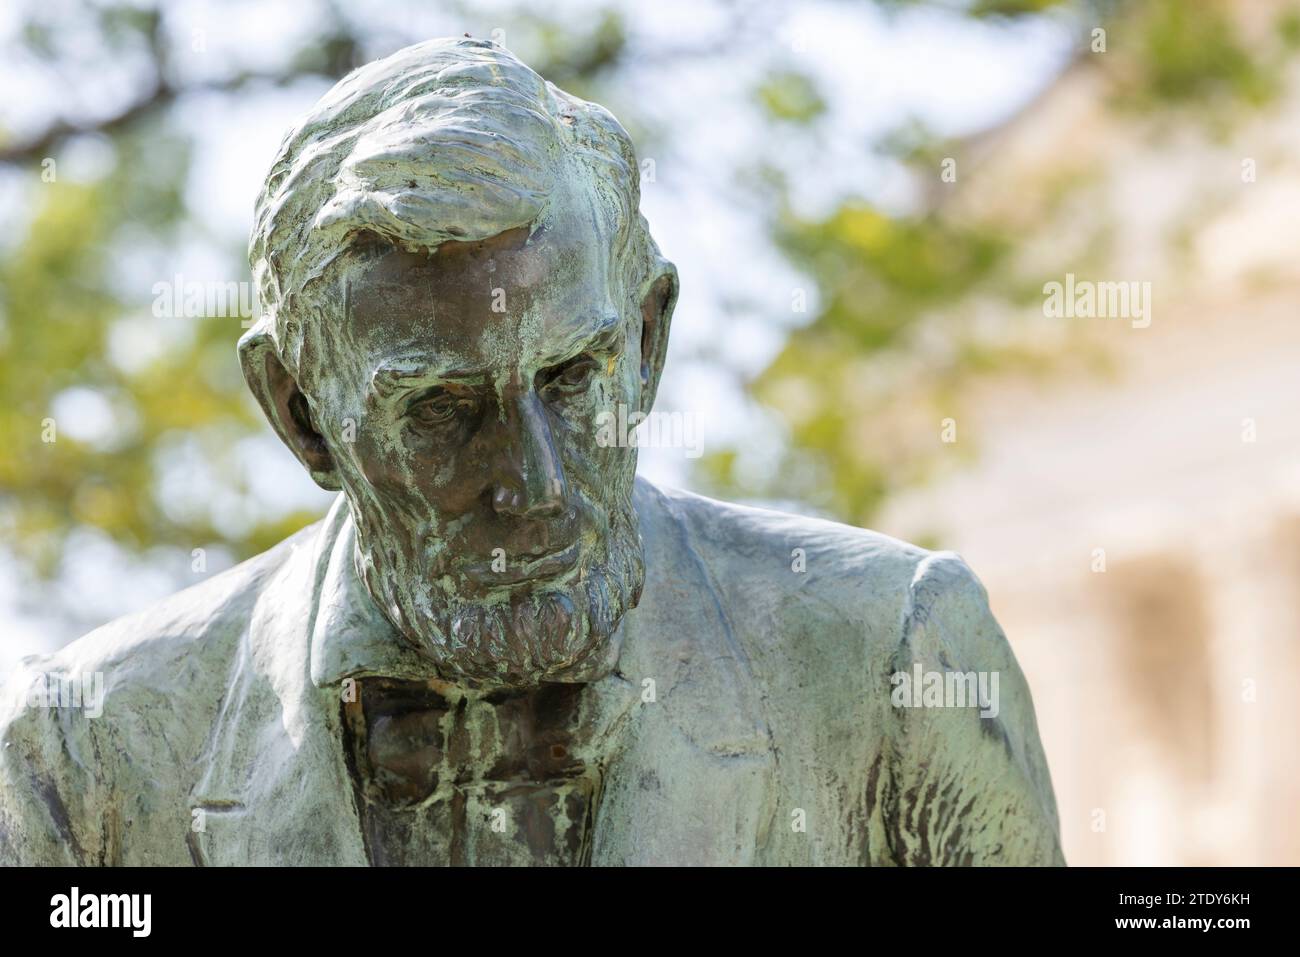 Topeka, Kansas, USA - June 17, 2023: Afternoon light shines on a public copper statue of Abraham Lincoln outside of the Kansas State capitol building. Stock Photo